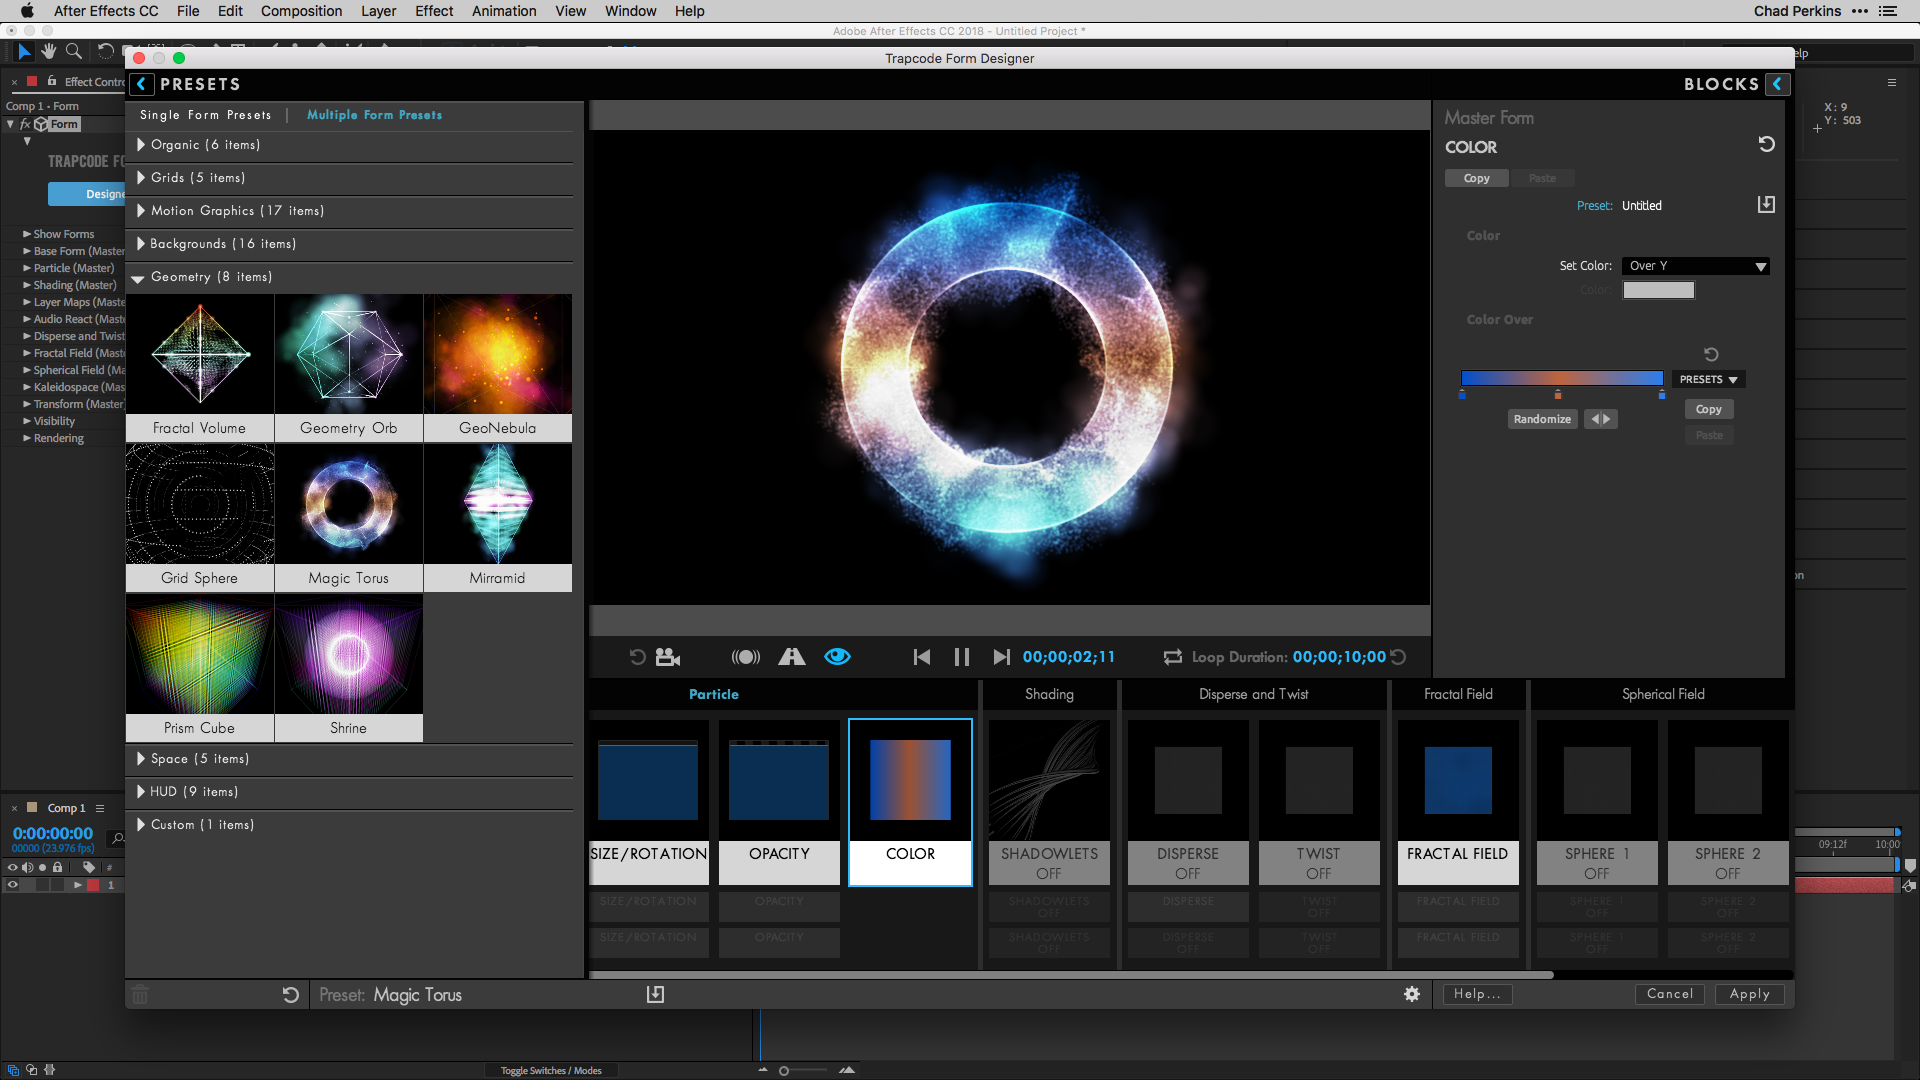 adobe after effects trapcode particular plugin